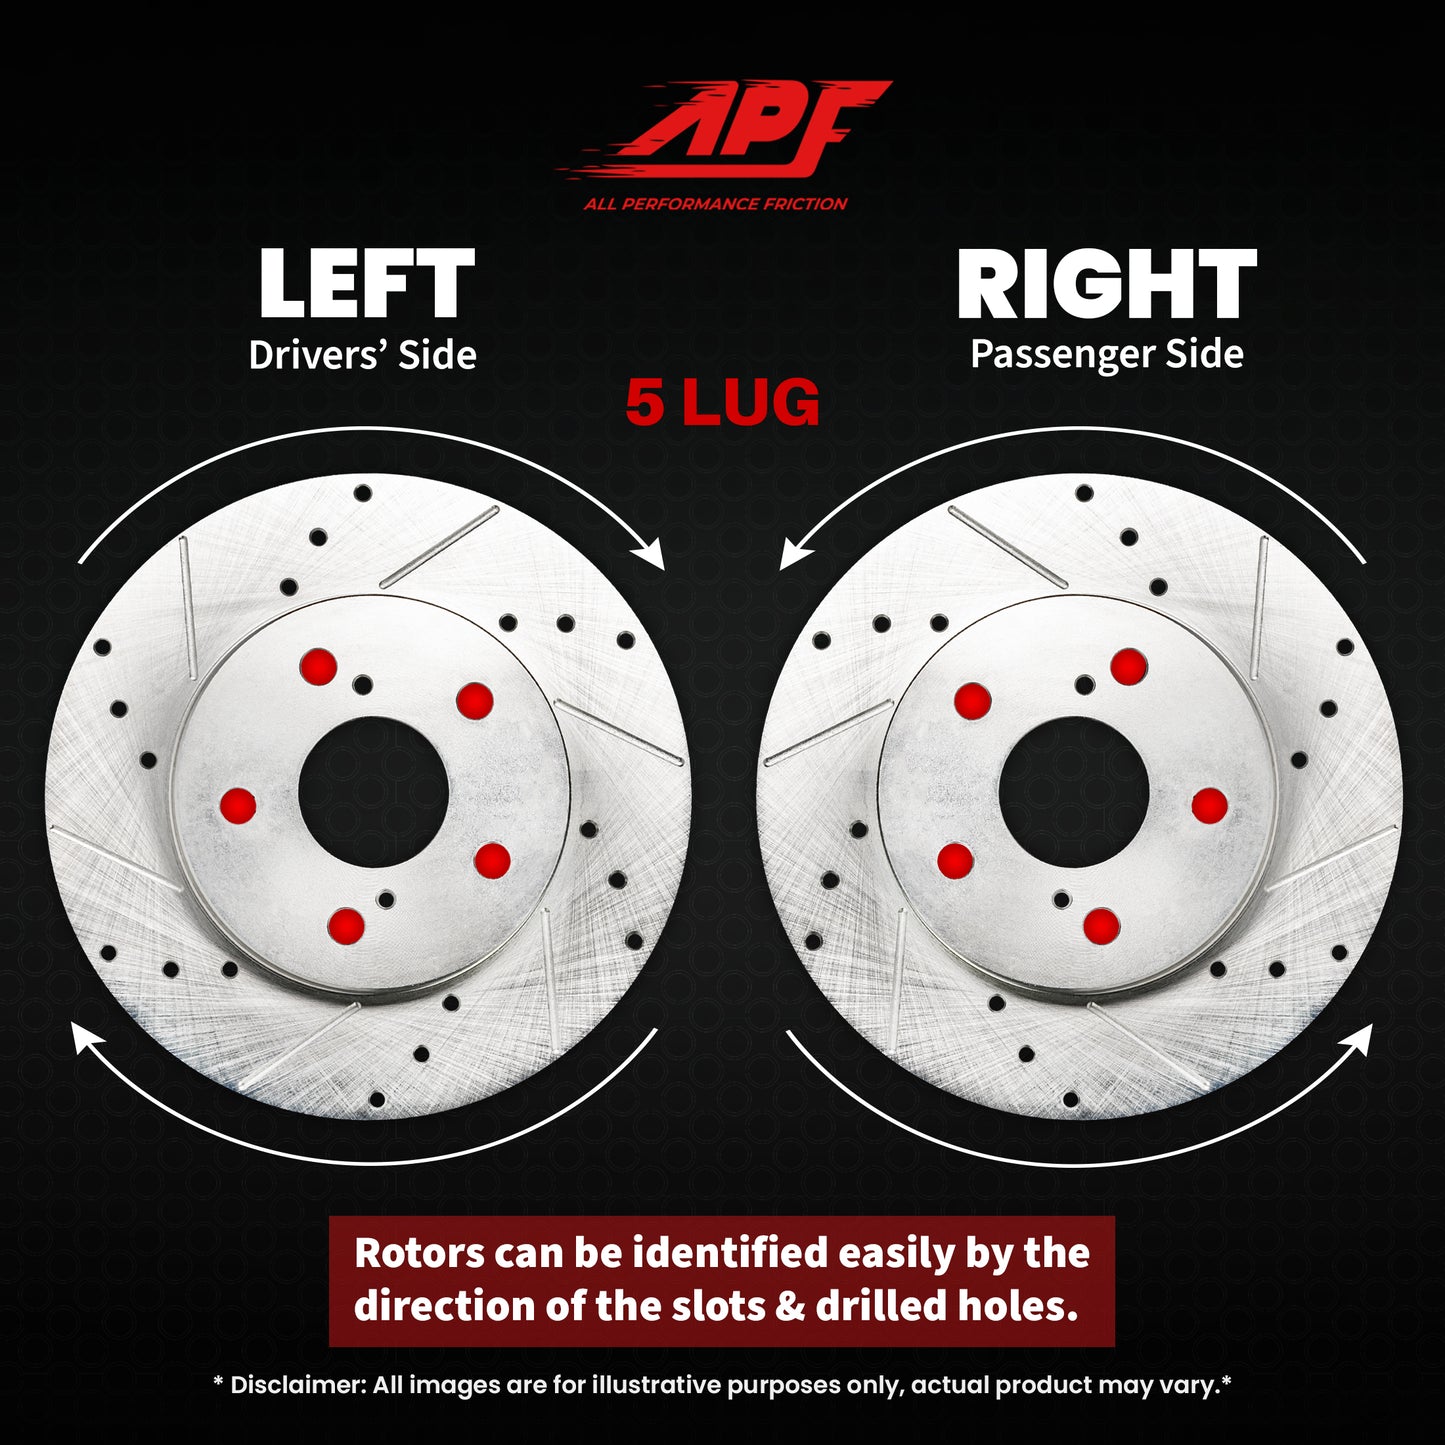 APF All Performance Friction Front and Rear Rotors and Pads Full Kit compatible with Chevrolet Camaro 2010-2015 Zinc Drilled Slotted Rotors with Ceramic Carbon Fiber Brake Pads | $558.33